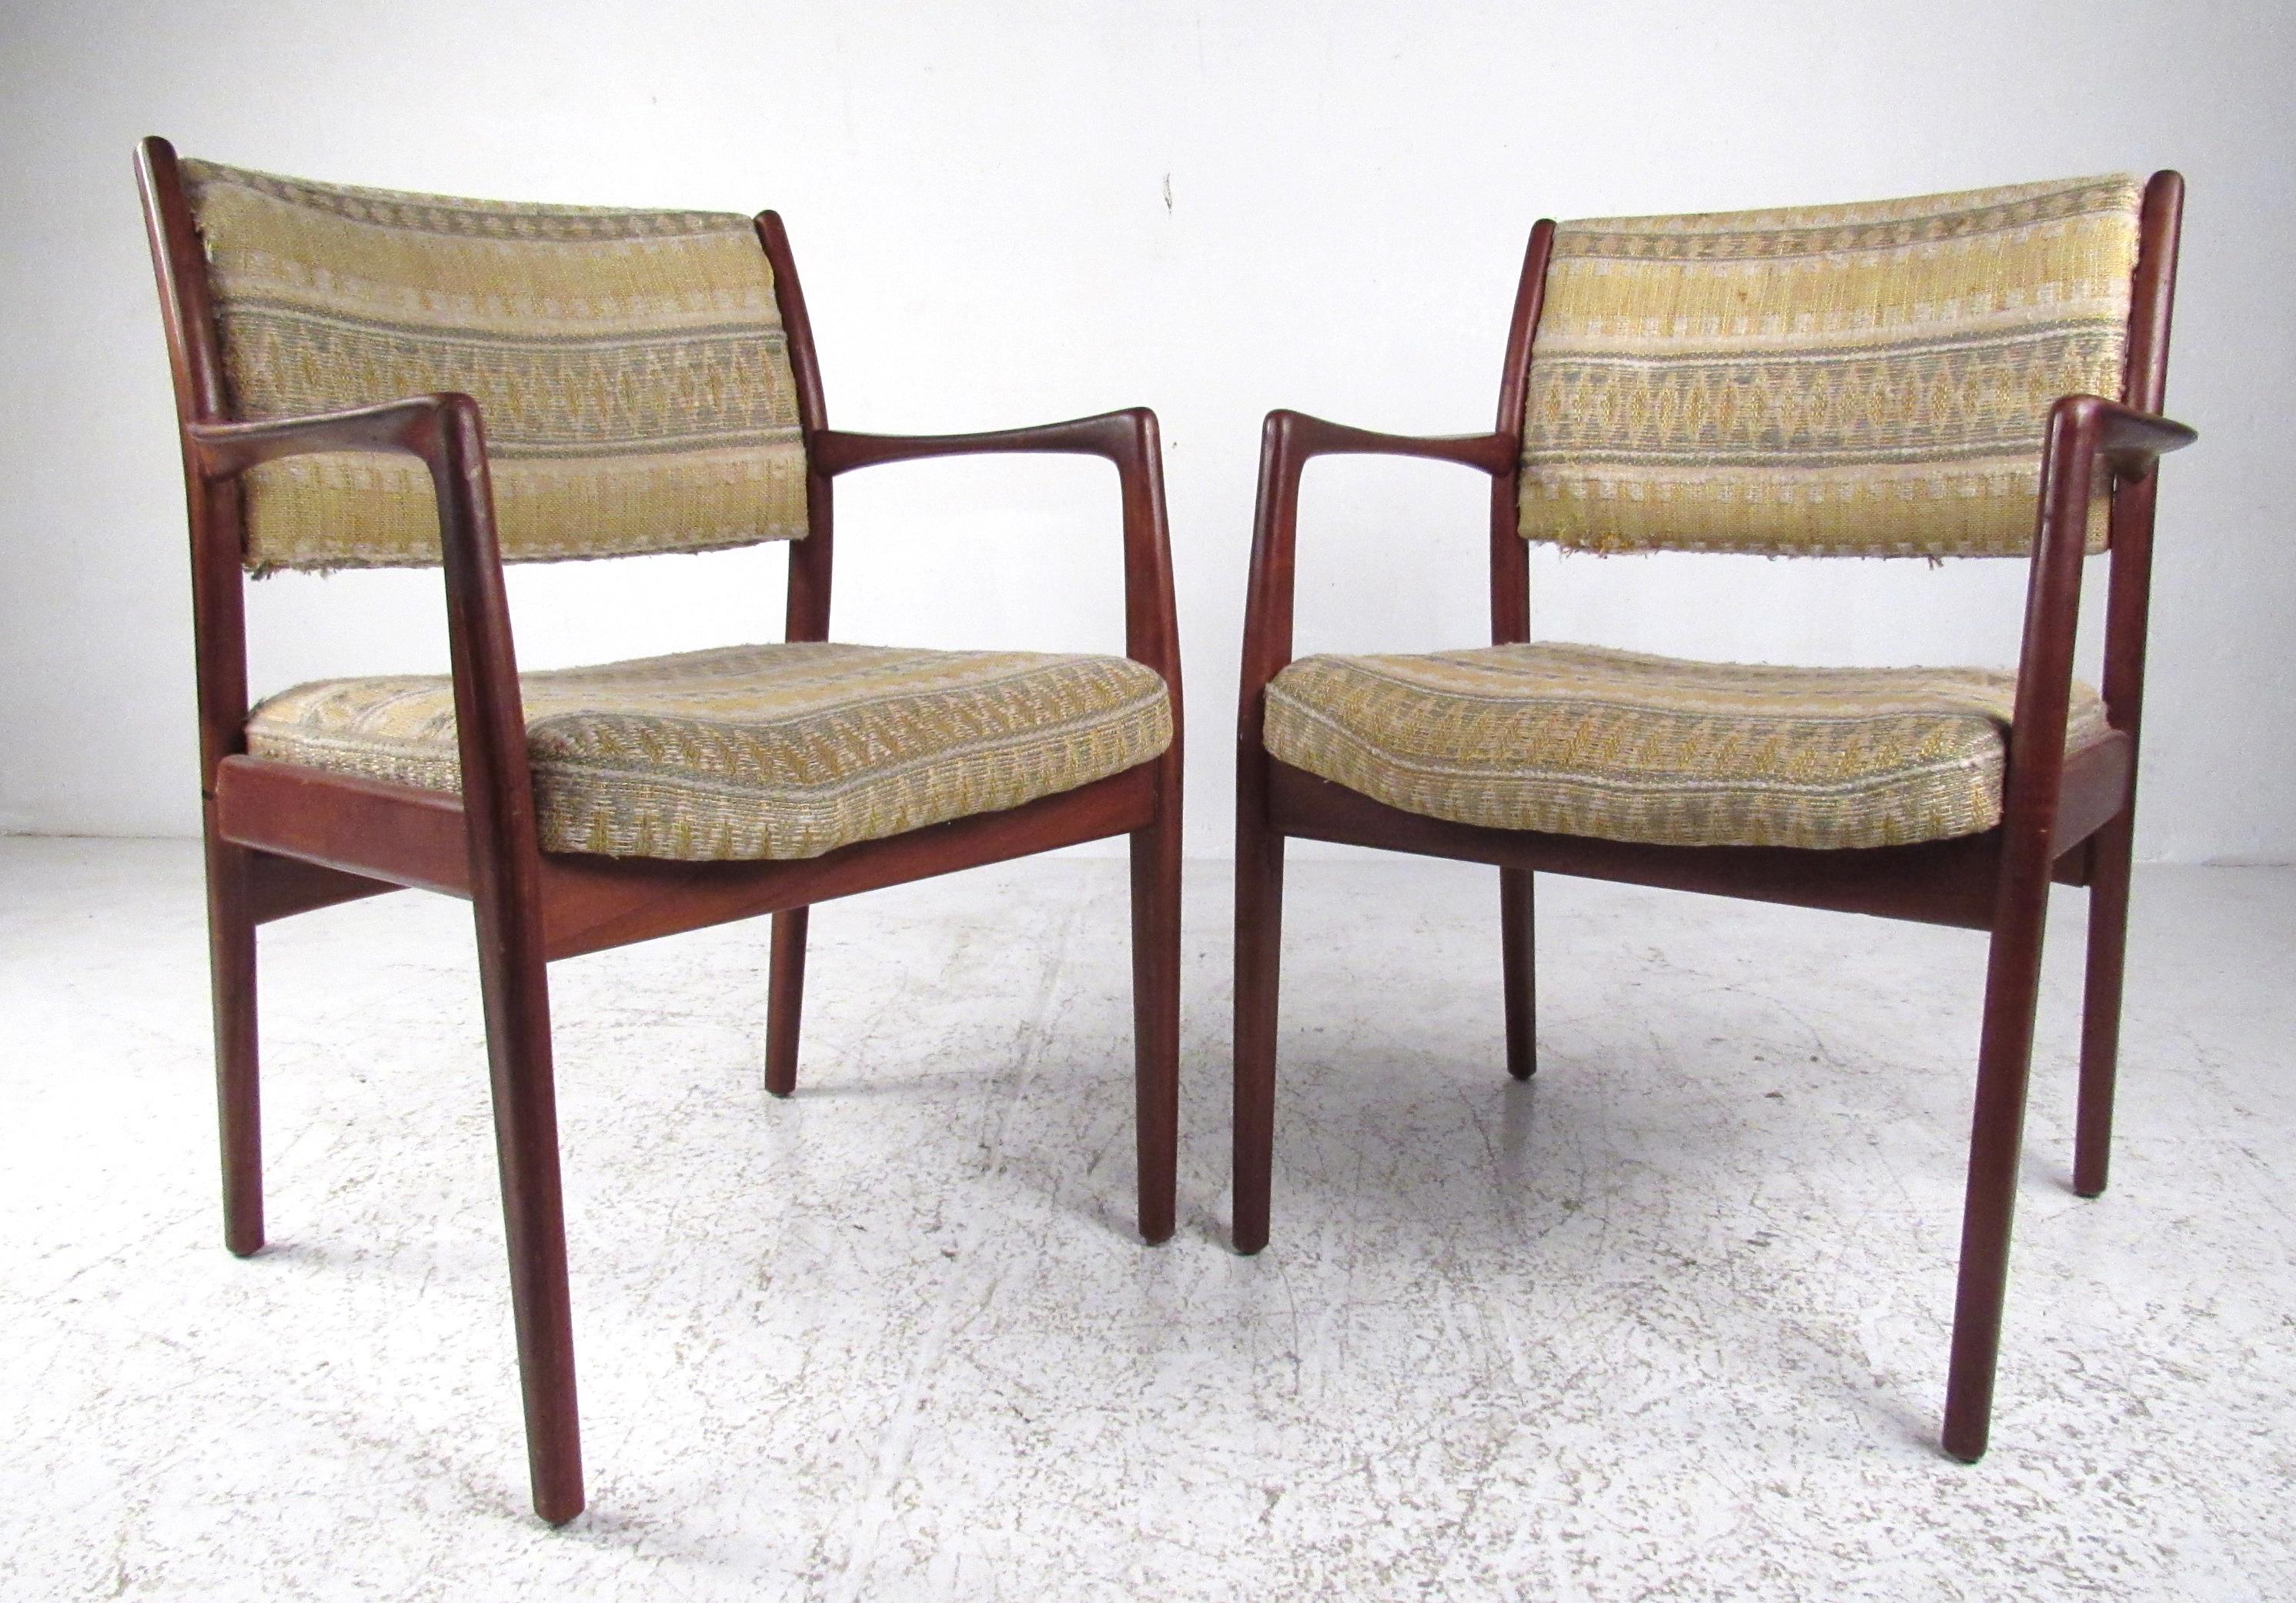 Classic pair of Danish style midcentury teak armchairs ideal for any home or office environment. Featuring sculpted arms with a thick upholstered seat and back, these chairs are both comfortable and stylish and will compliment any seating